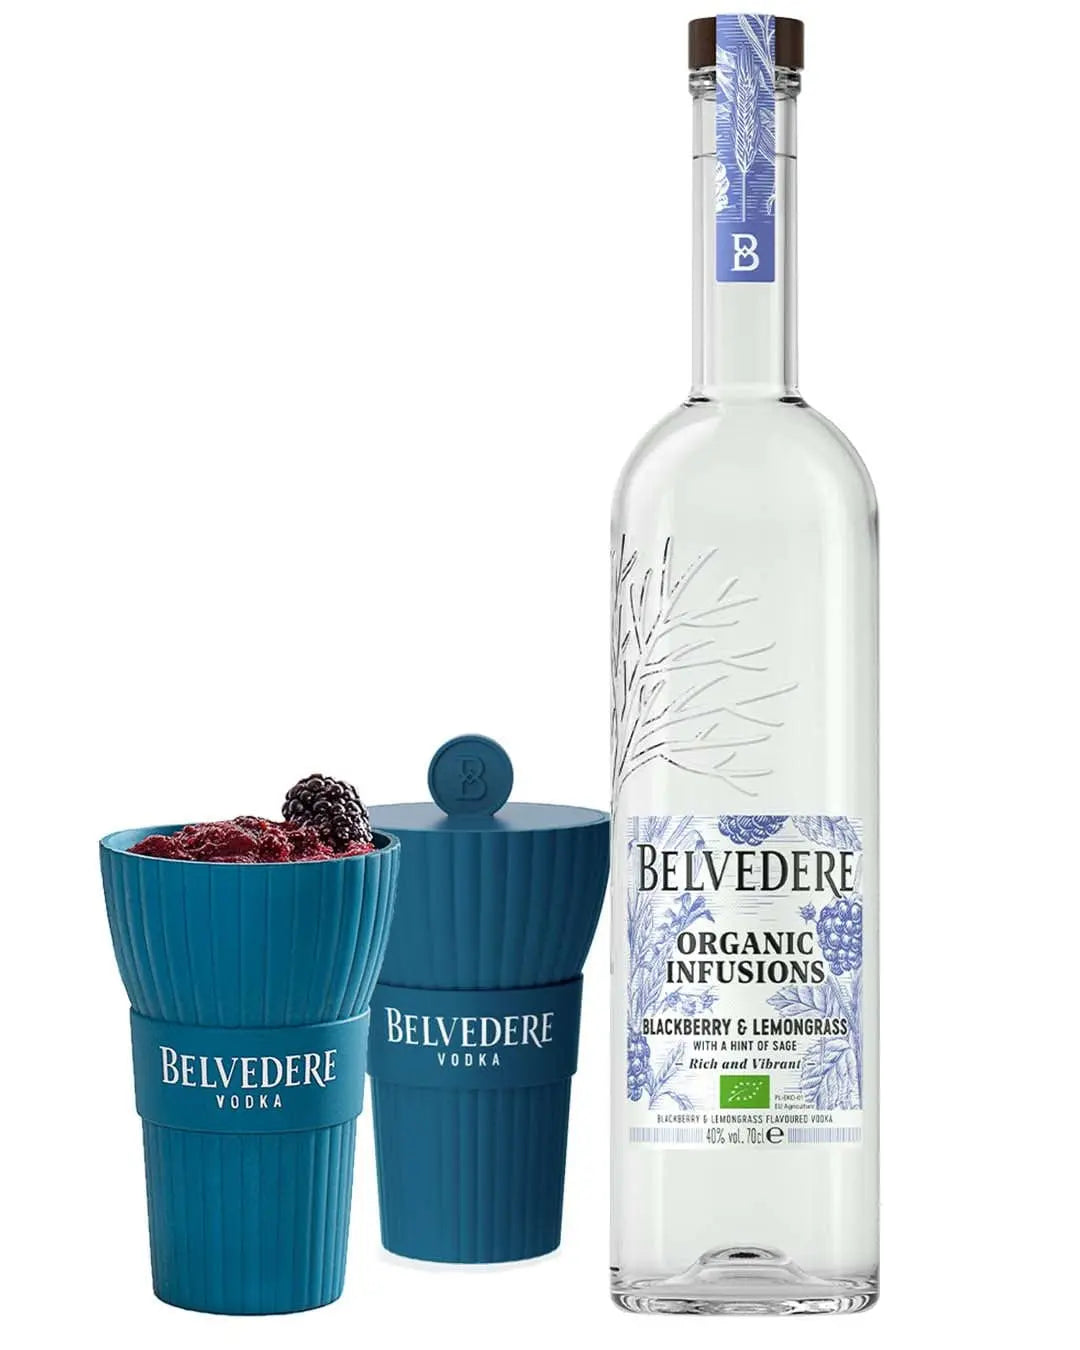 Belvedere Organic Infusions Blackberry & Lemongrass Vodka, 70 cl WITH FREE GIFT Vodka